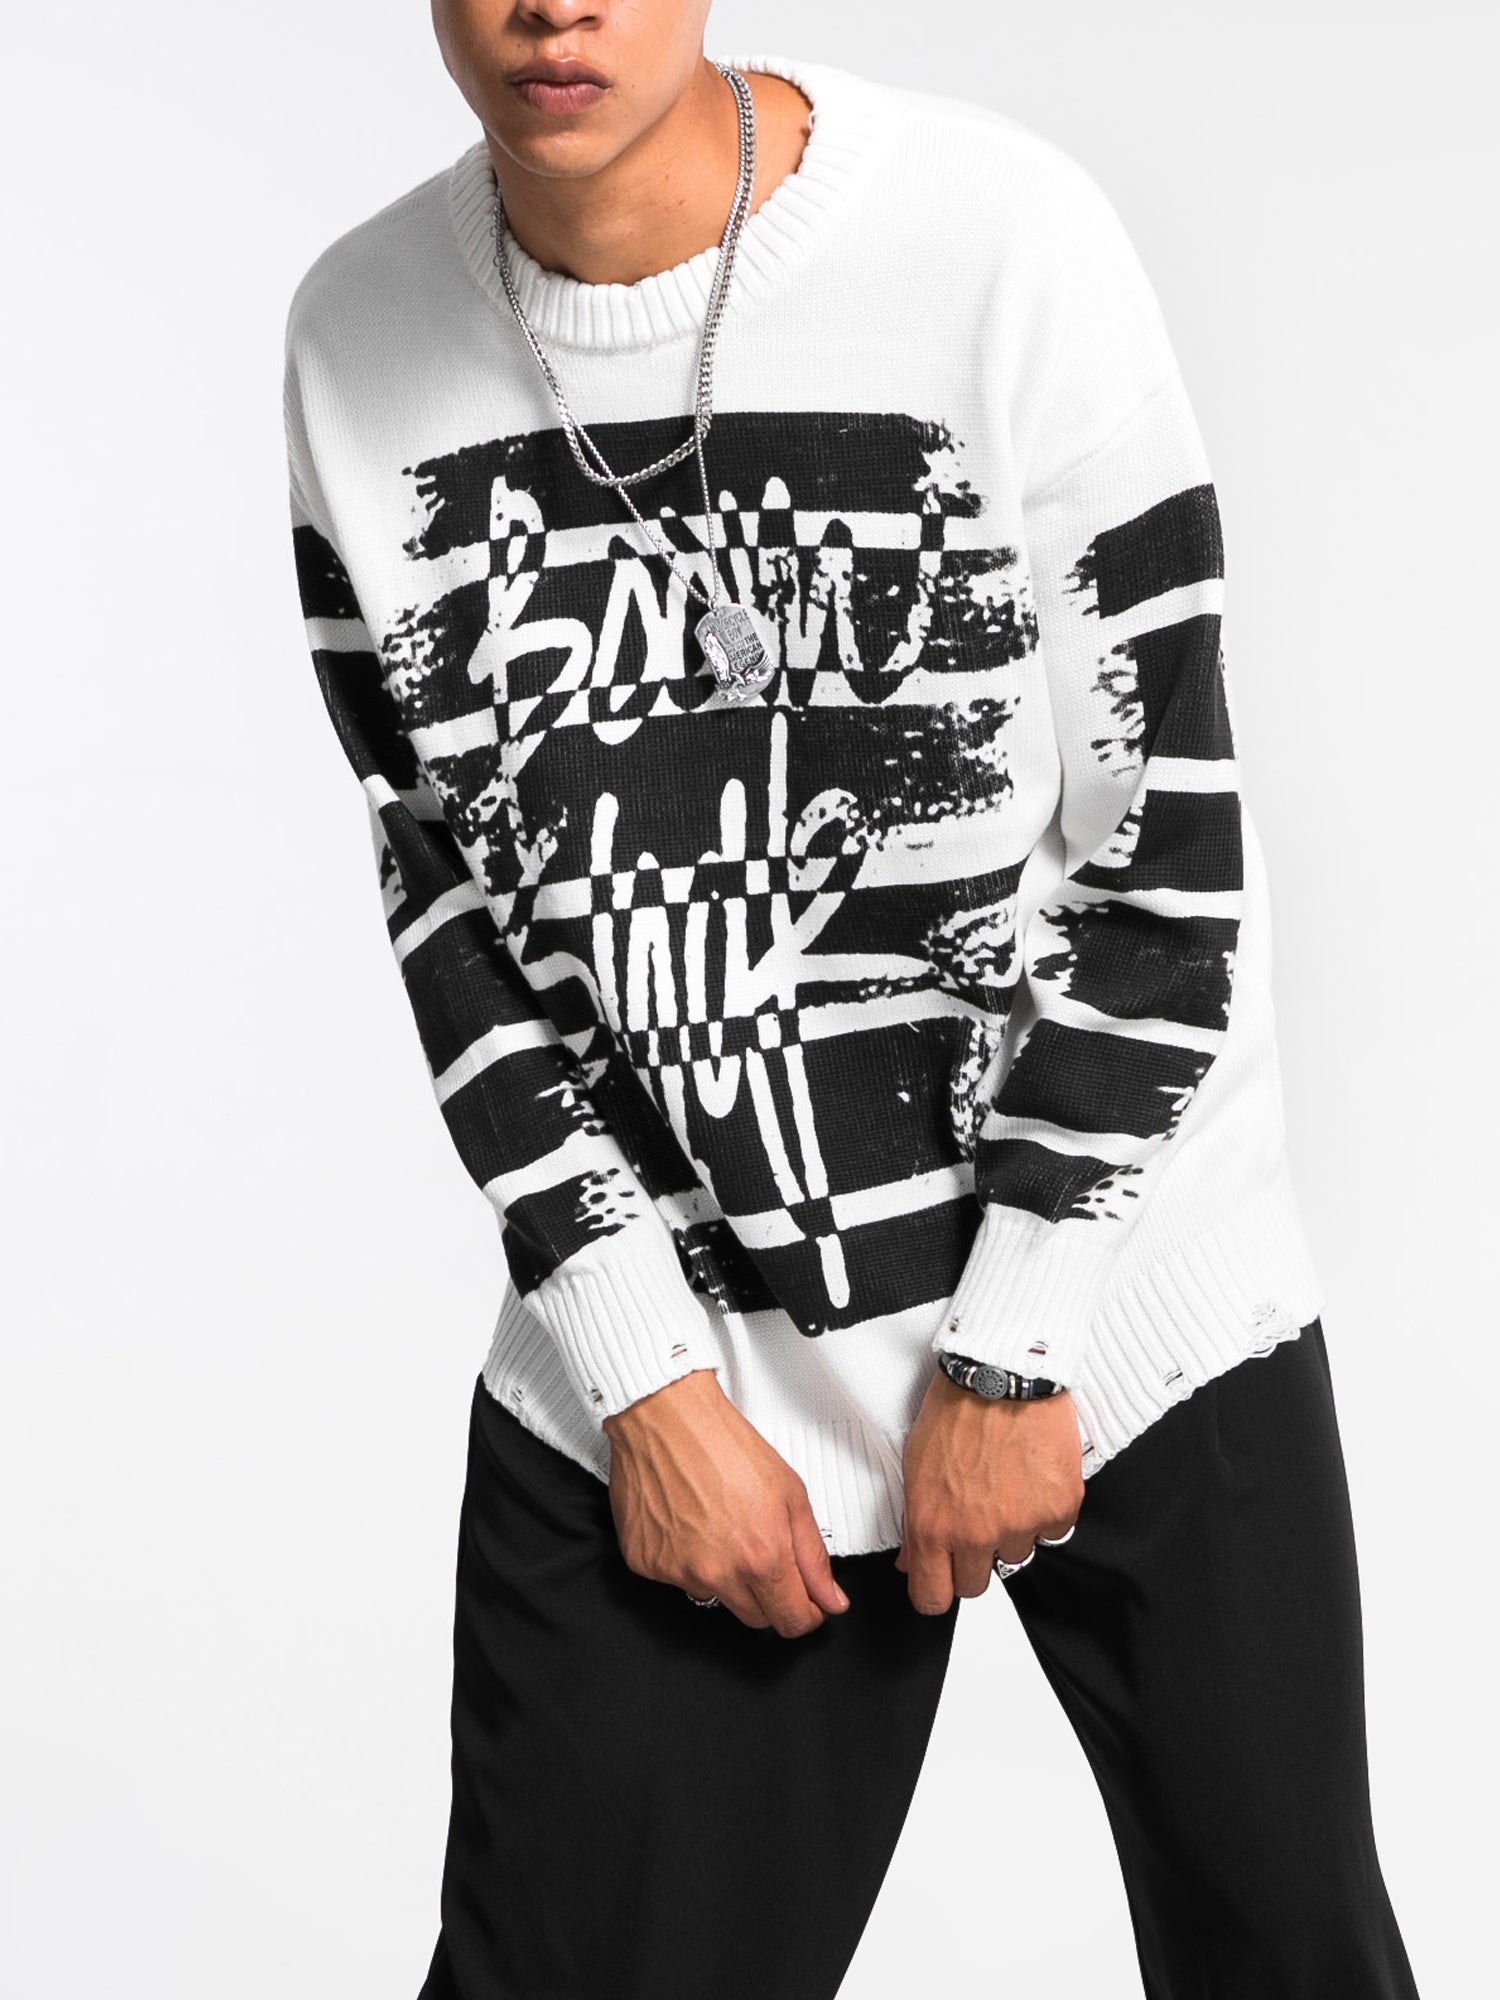 JUSTNOTAG Hiphop Letter Cotton Round Neck Sweaters